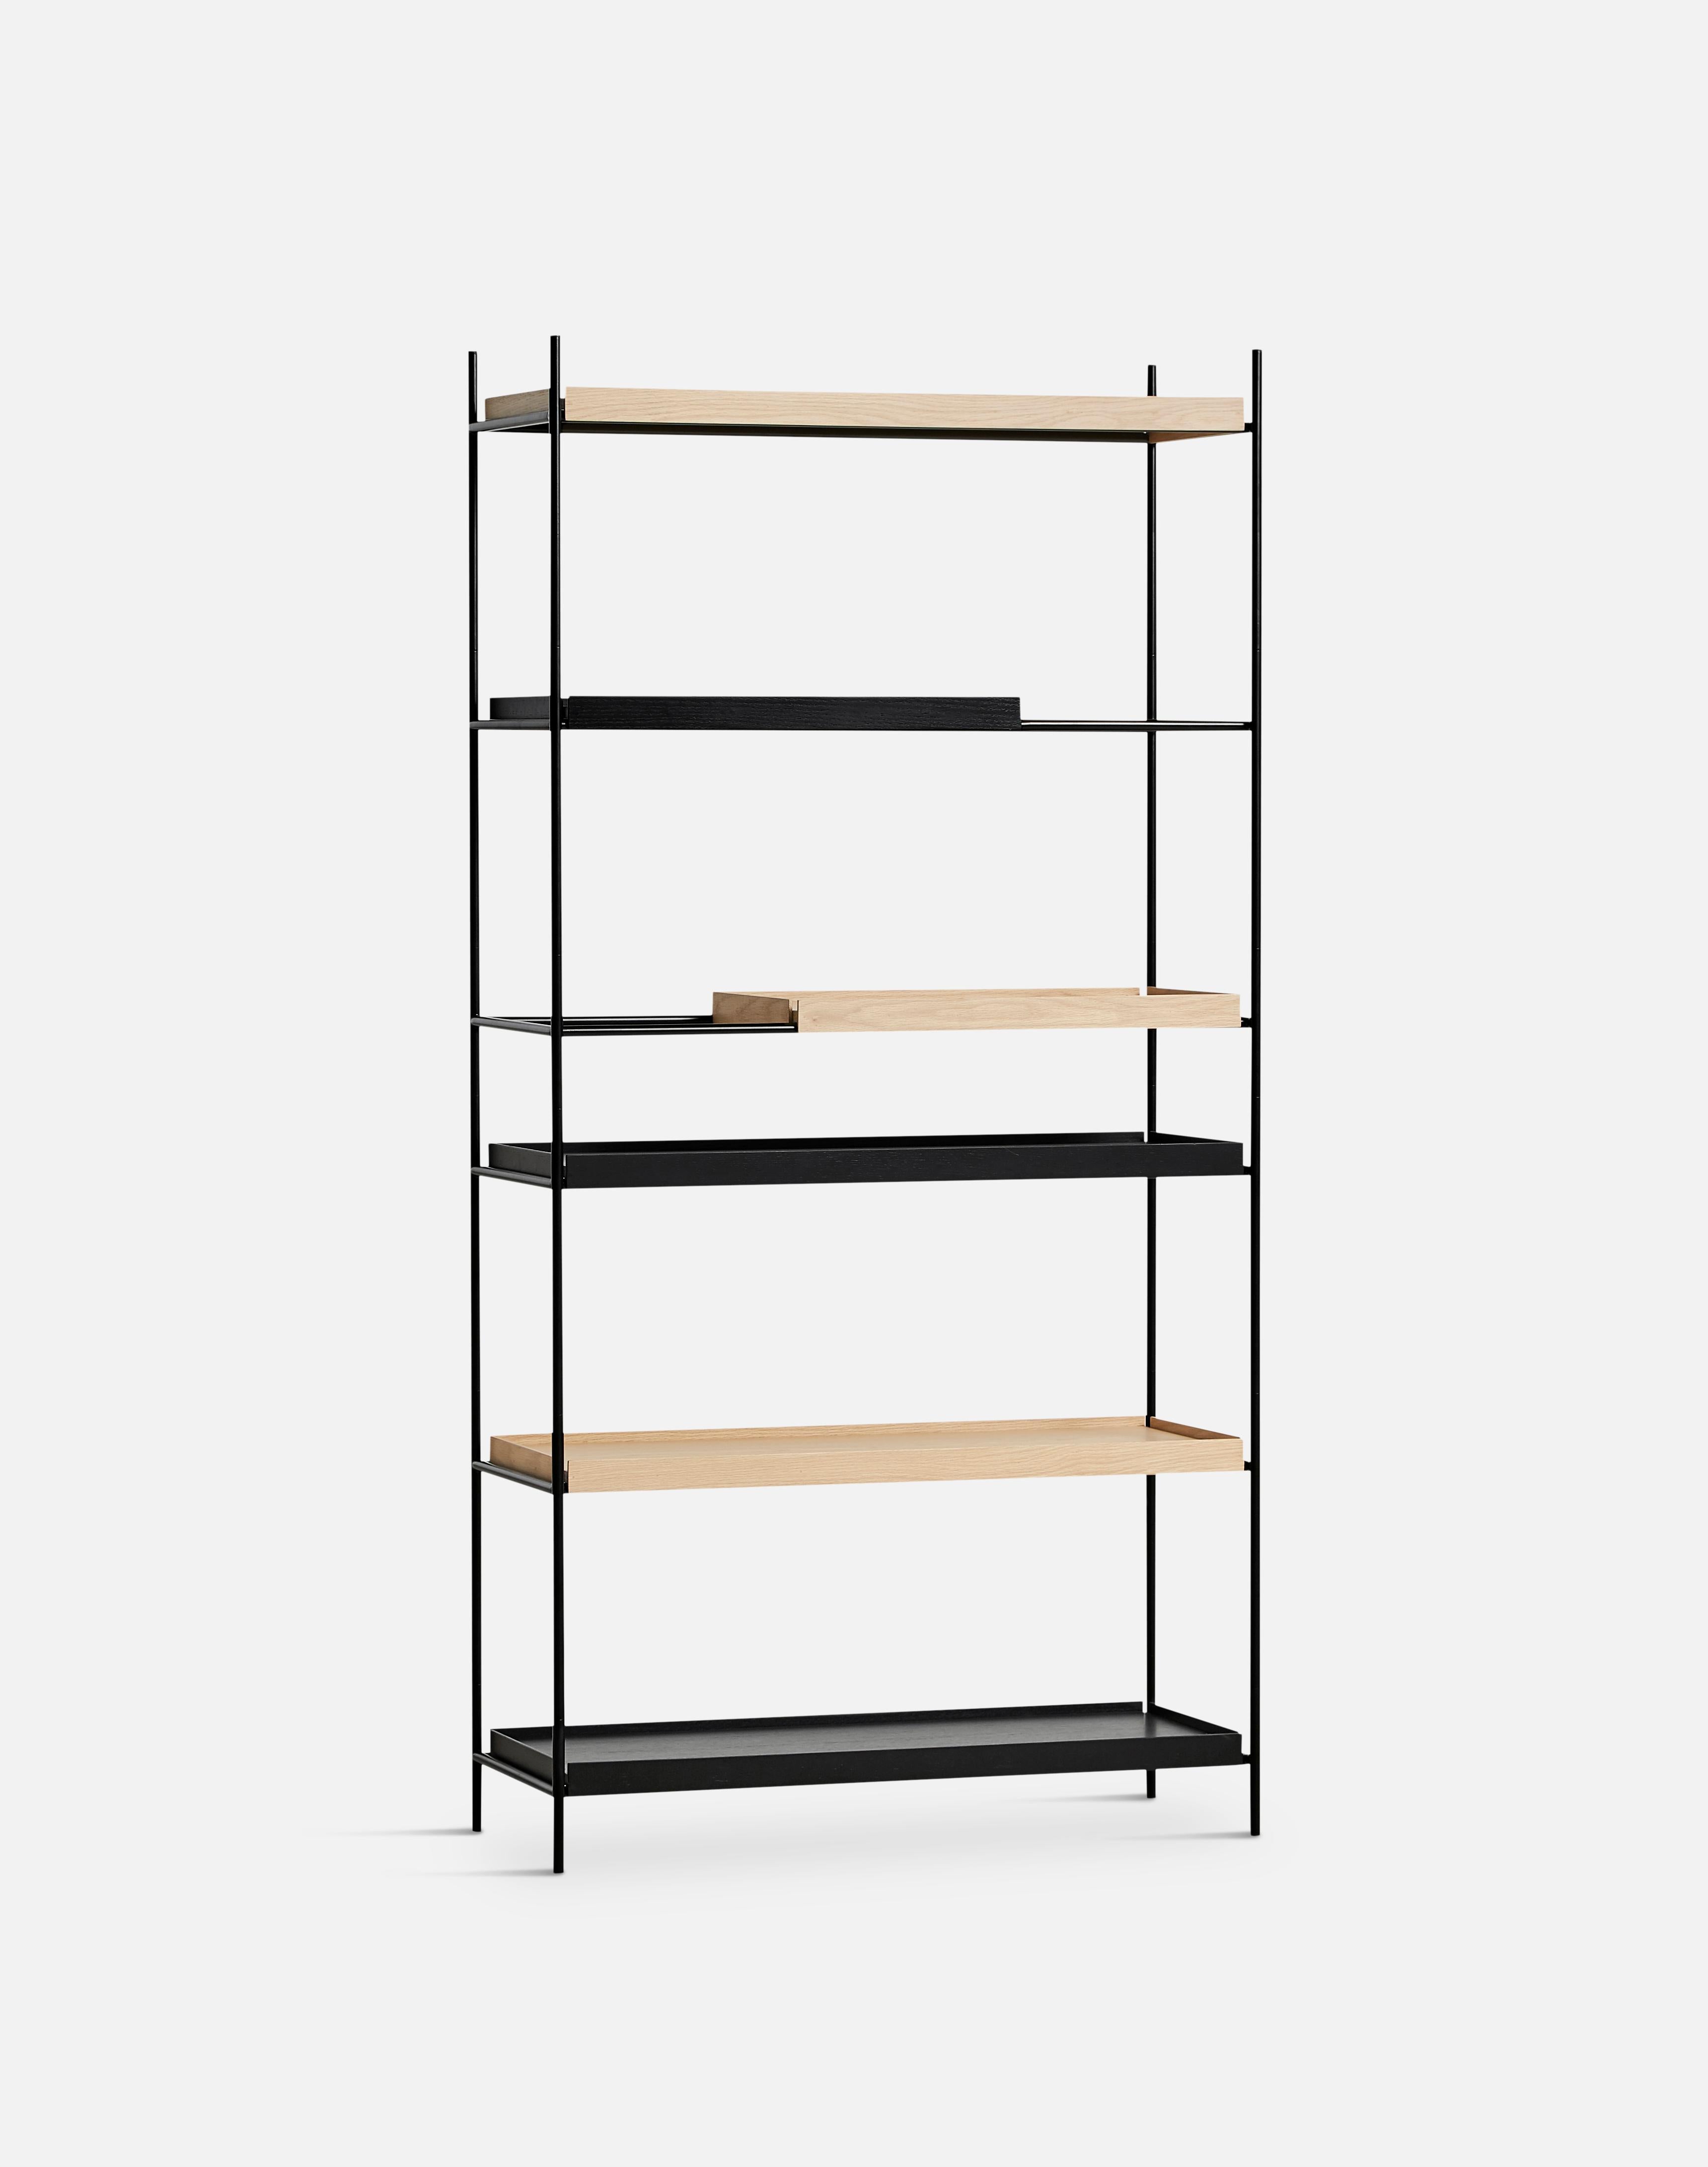 High oak and black tray shelf I by Hanne Willmann
Materials: metal, oak.
Dimensions: D 40 x W 100 x H 201 cm
Also available in different tray conbinations and 2 sizes: H 81, H 201 cm.

Hanne Willmann is a dynamic German designer with her own